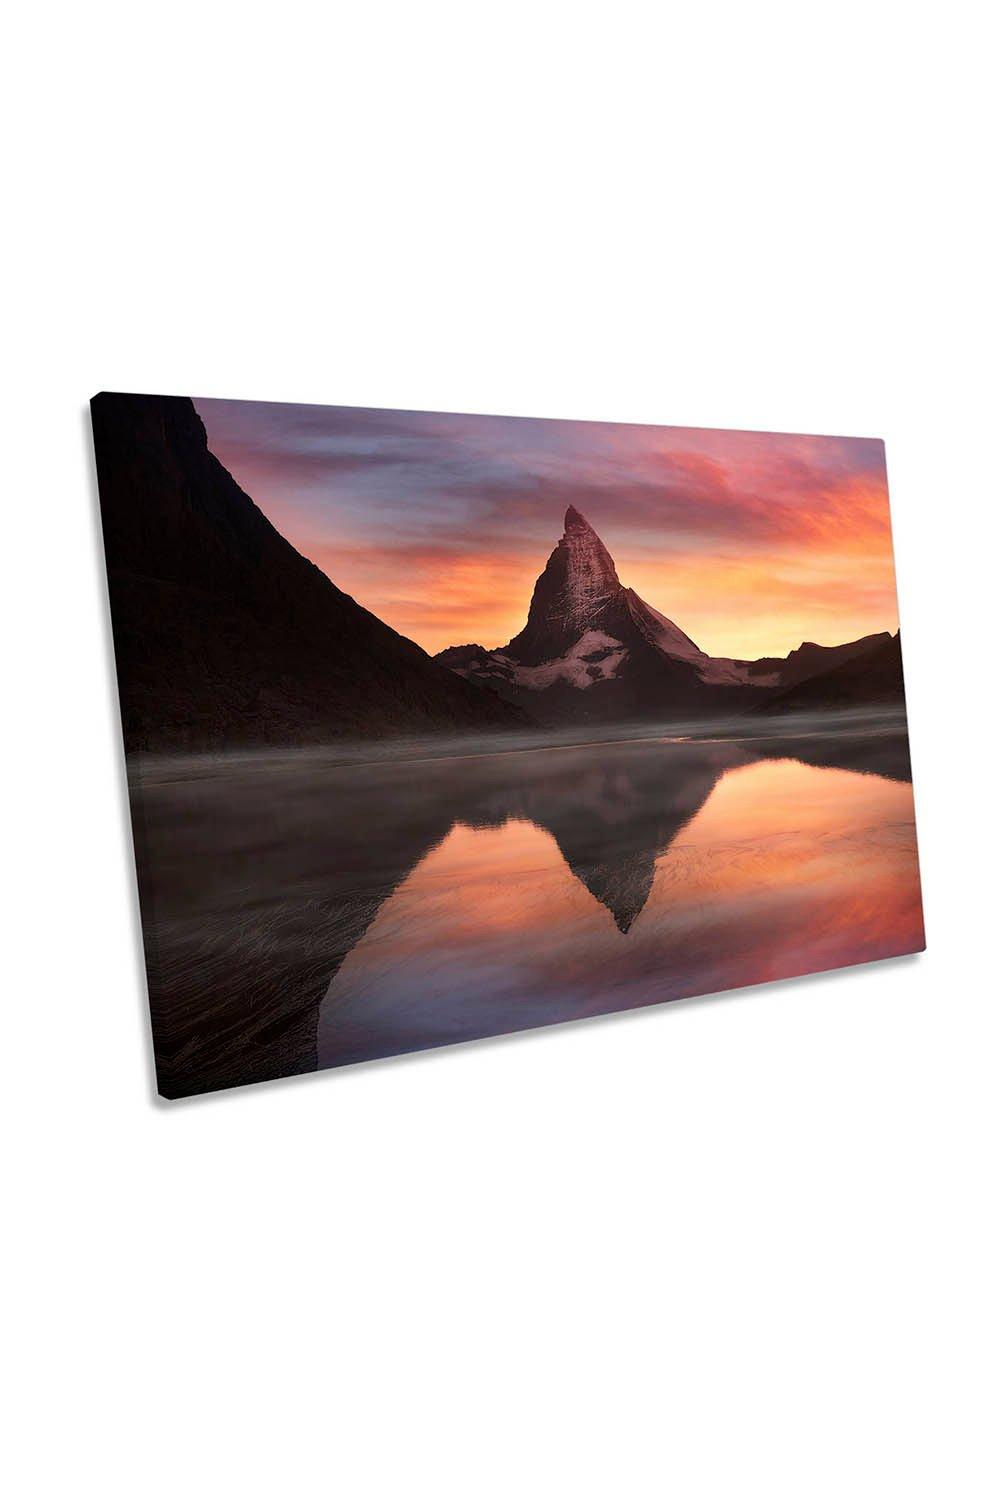 The Mountain Landscape Alps Canvas Wall Art Picture Print